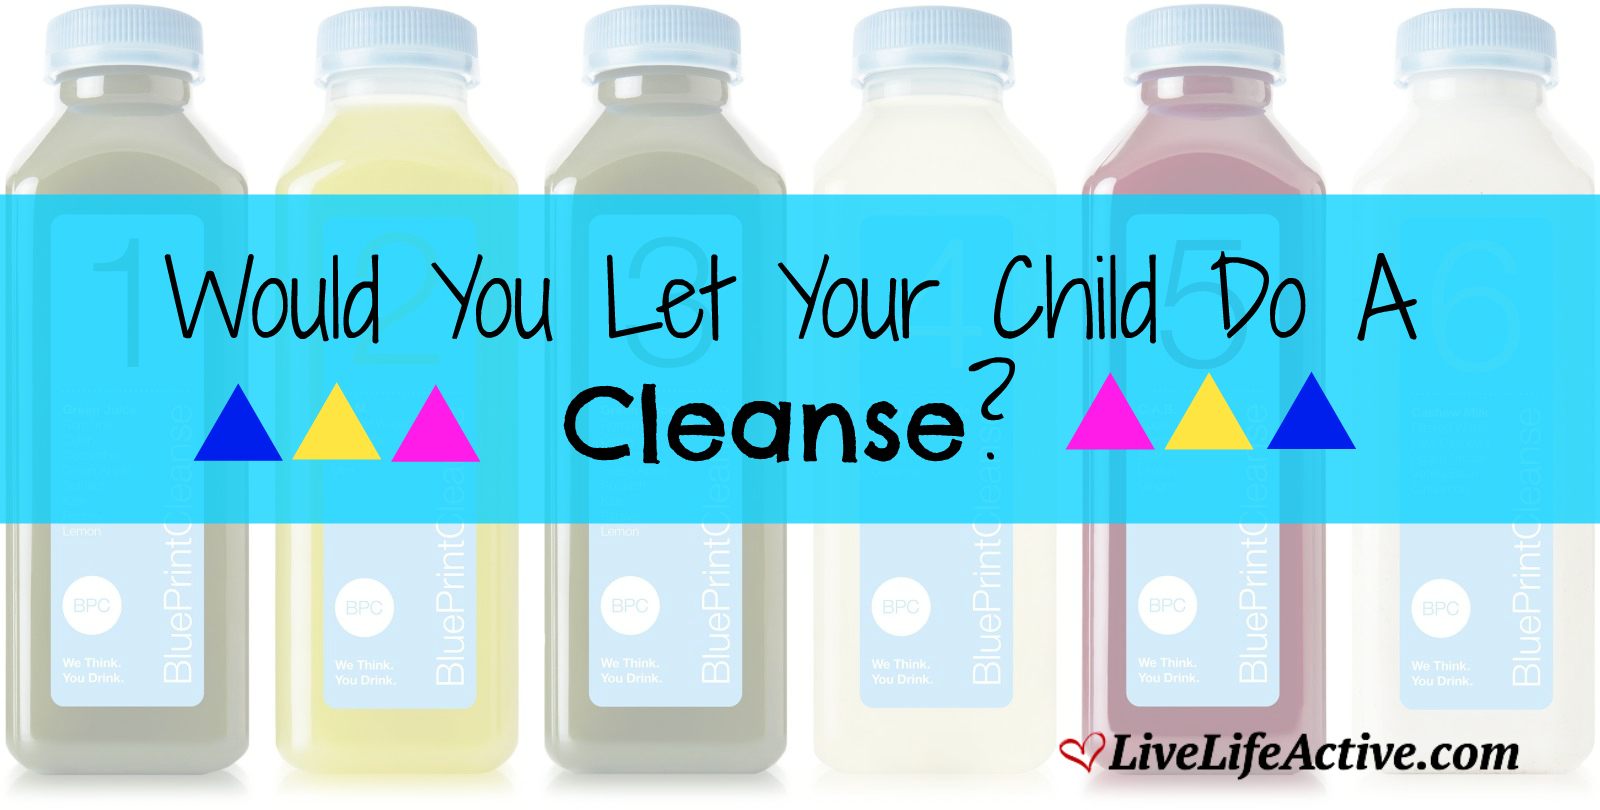 Would You Let Your Child Do A Cleanse